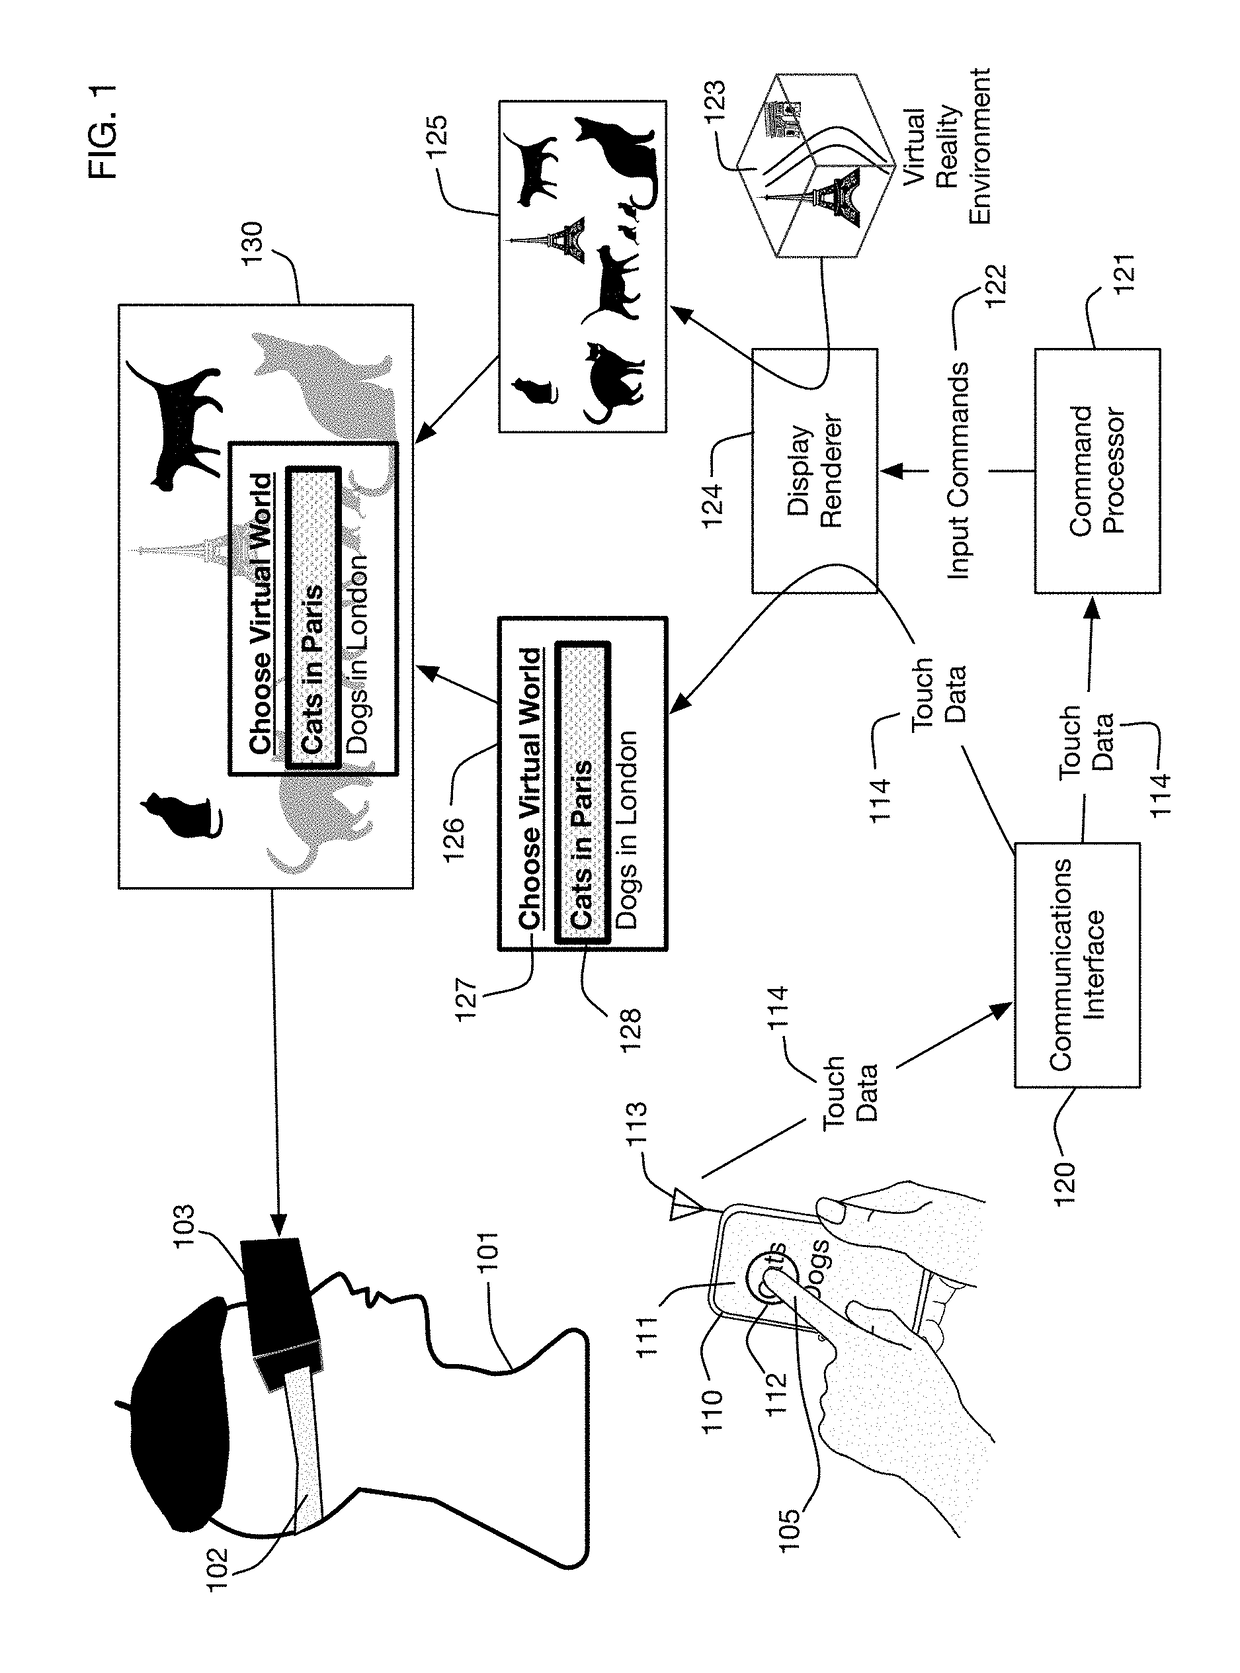 Head mounted display linked to a touch sensitive input device